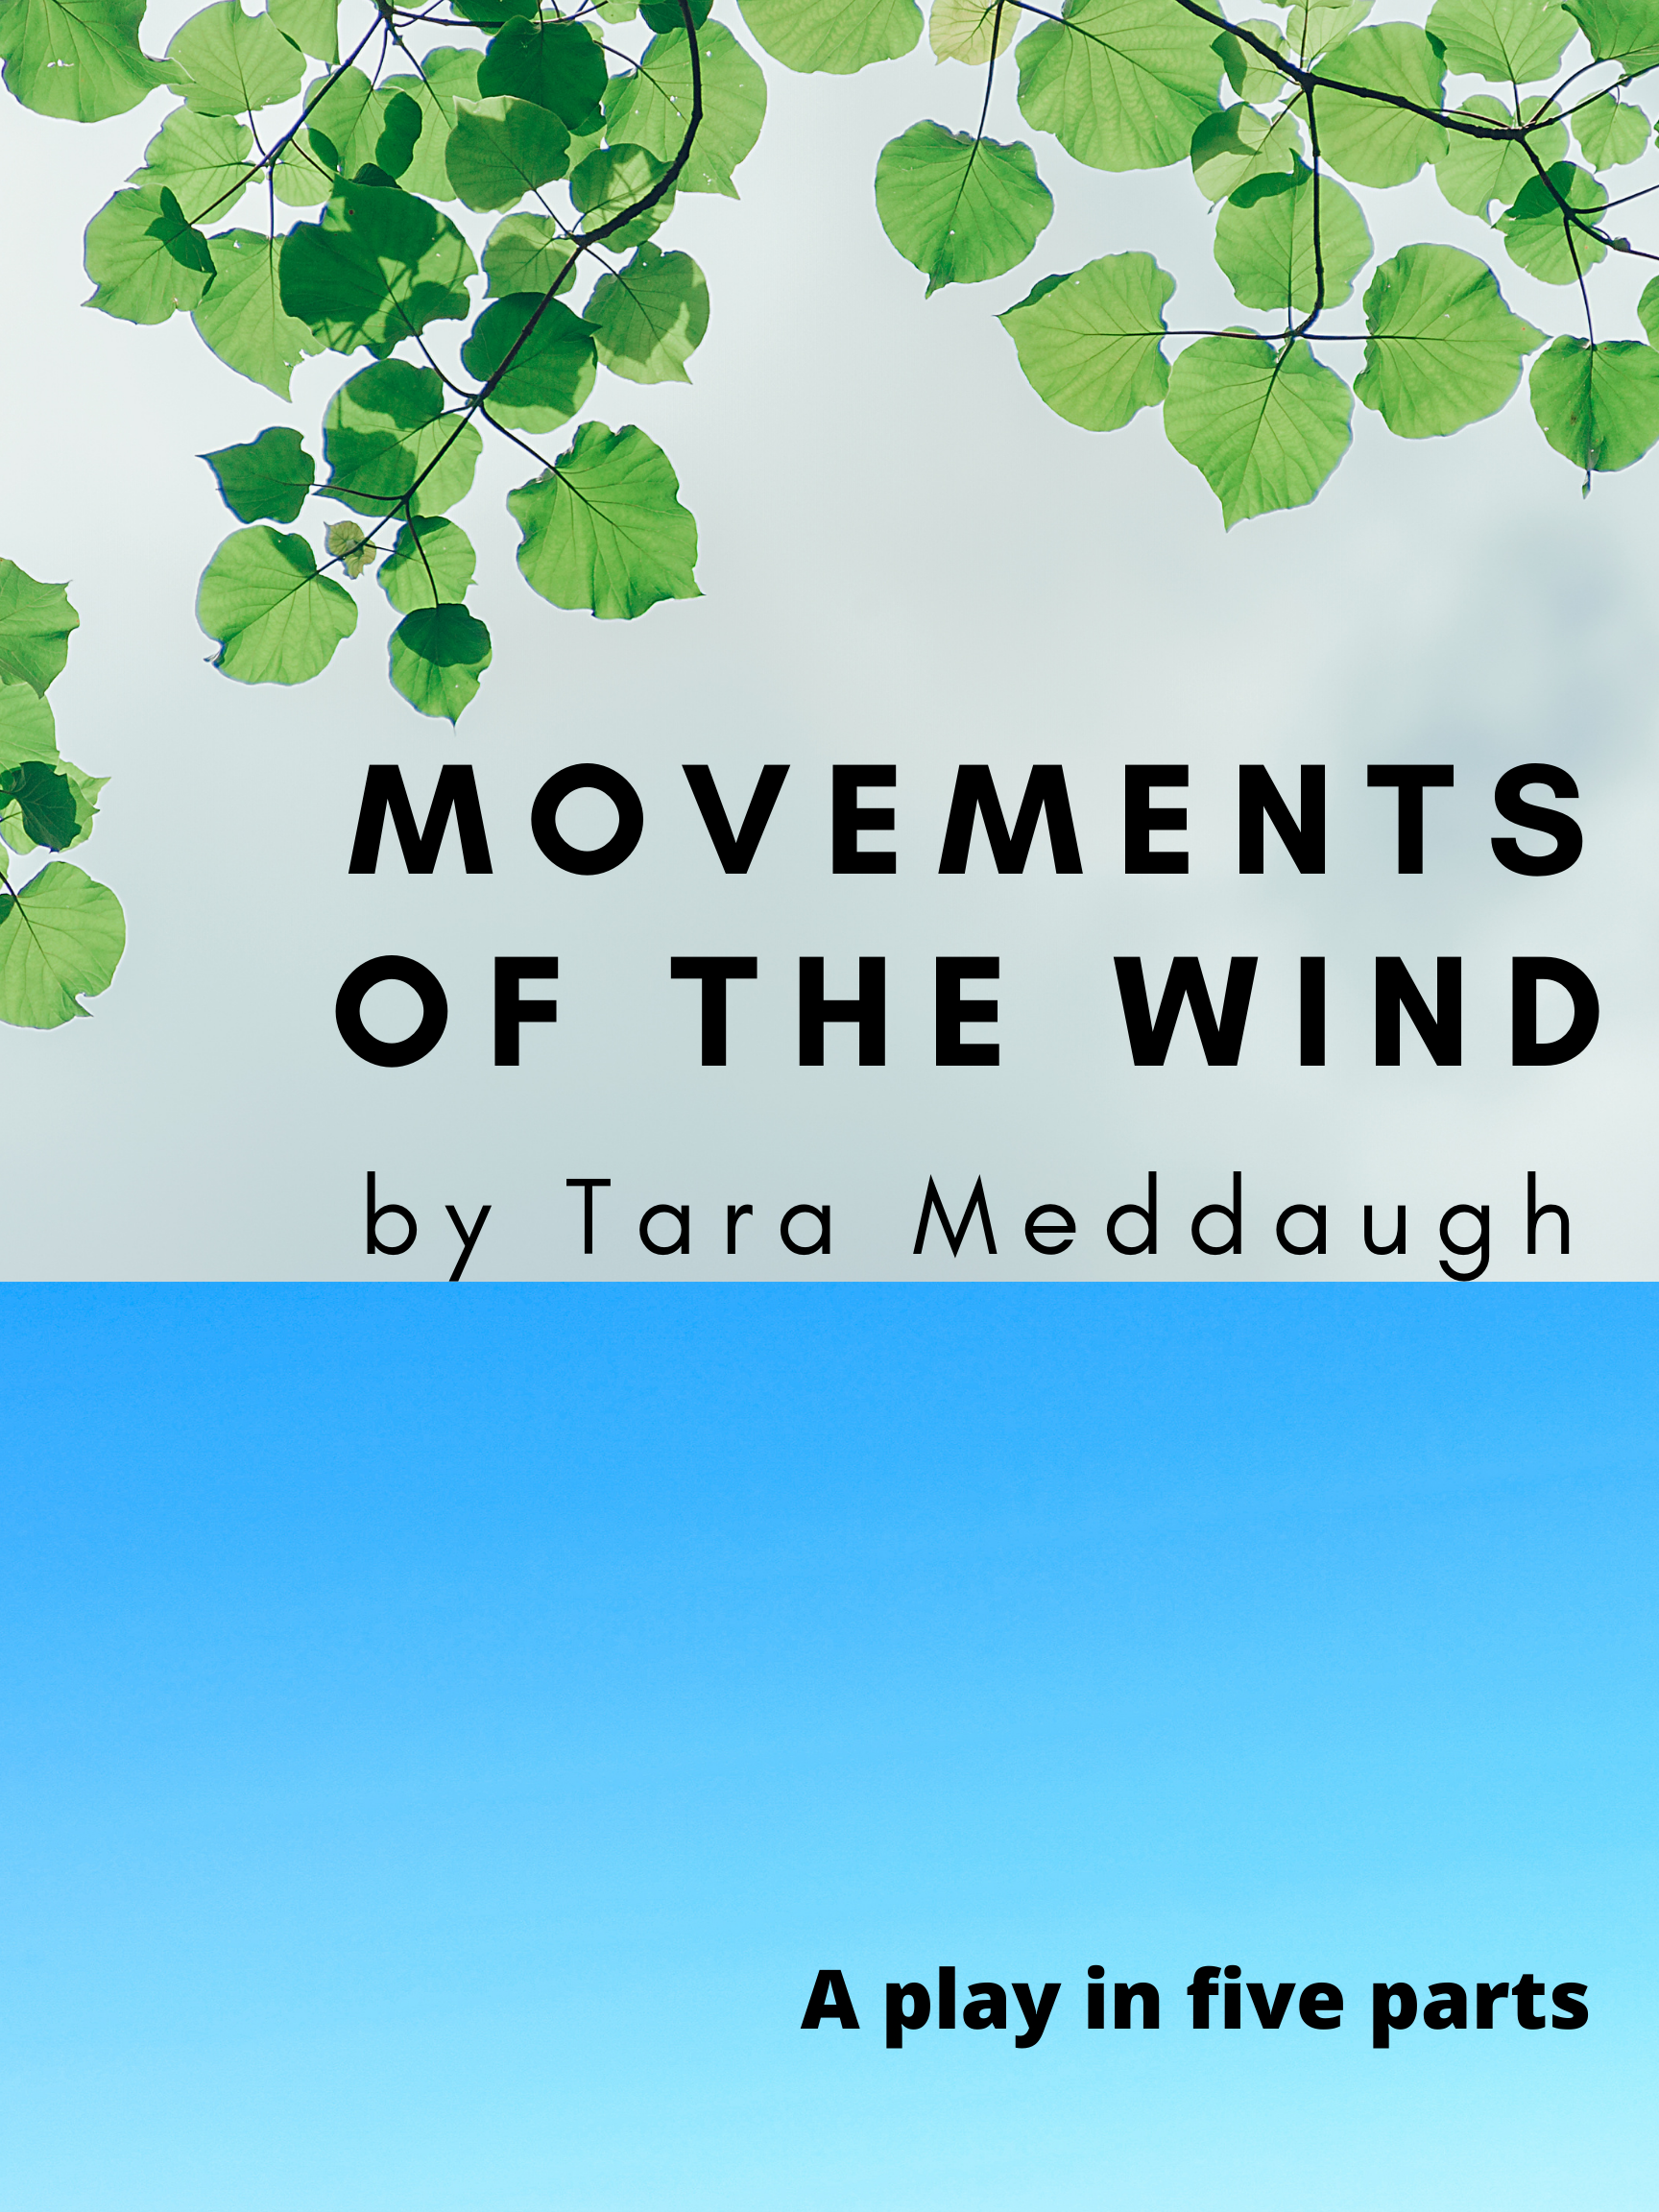 Movements of the wind.png